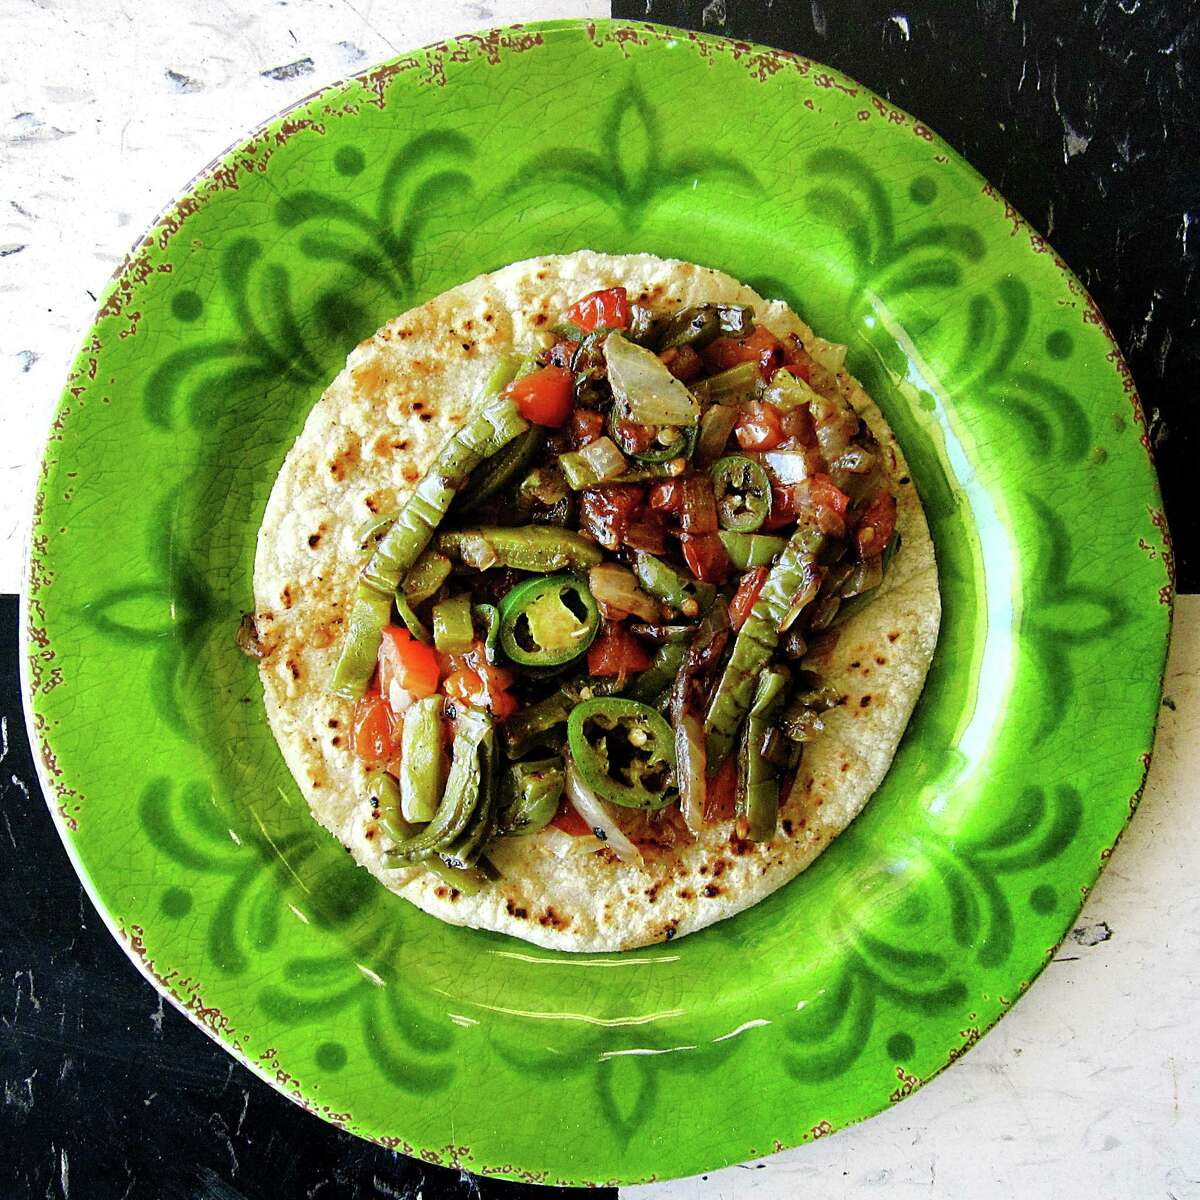 Taco of the Week: Nopales a la mexicana taco on a handmade corn tortilla from Salsa's Cafe.